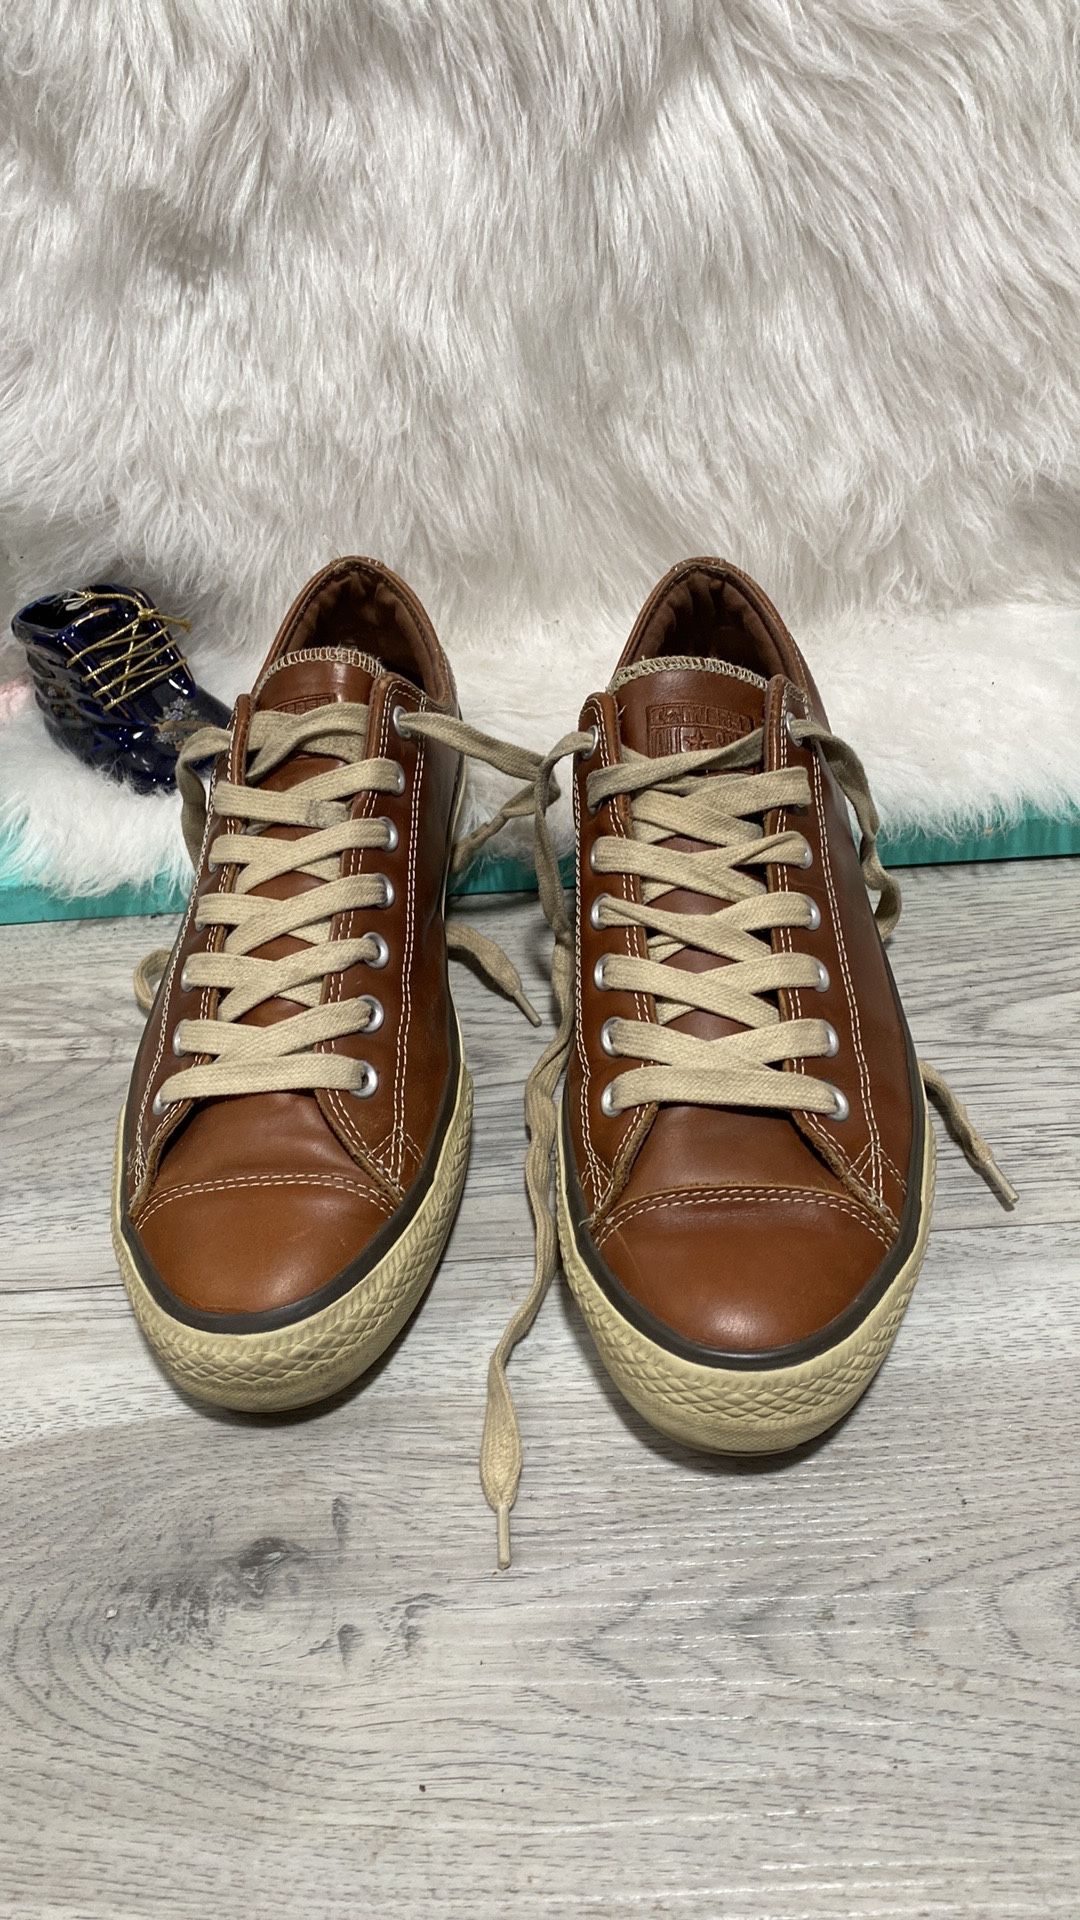 Converse All Stars Brown Leather Tops size 11.5 men 13.5 women for Sale in Dearborn, - OfferUp